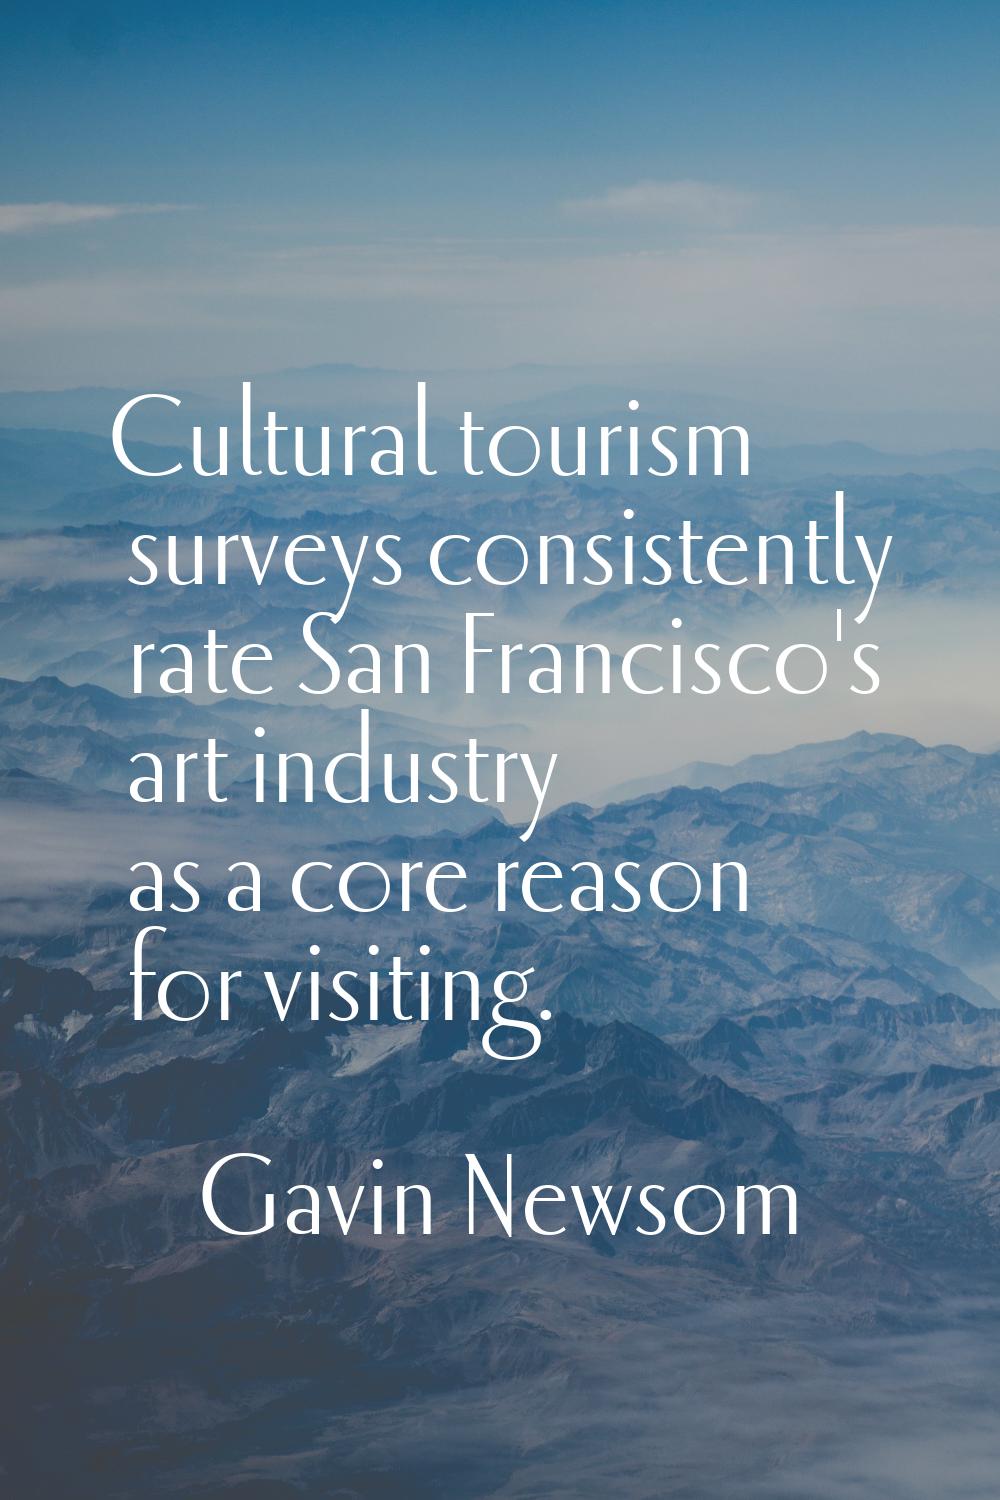 Cultural tourism surveys consistently rate San Francisco's art industry as a core reason for visiti